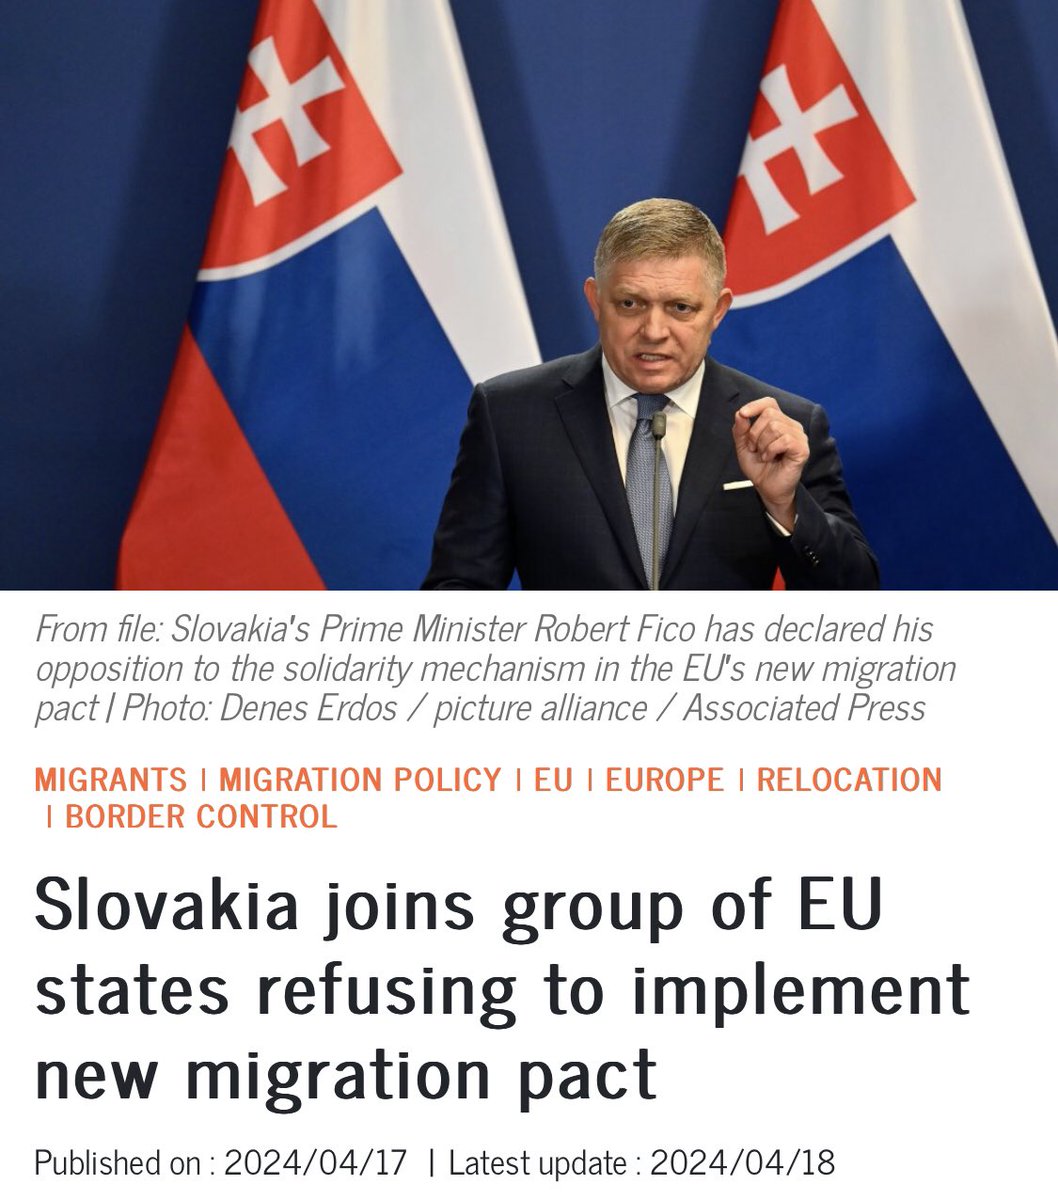 Slovakia has joined Poland and Hungary in expressing opposition to implementing the new EU Migration Pact rules that were voted in last week in the European Parliament. Ireland needs to be next! 🇮🇪 #IrelandOptsOut #IrelandisFull